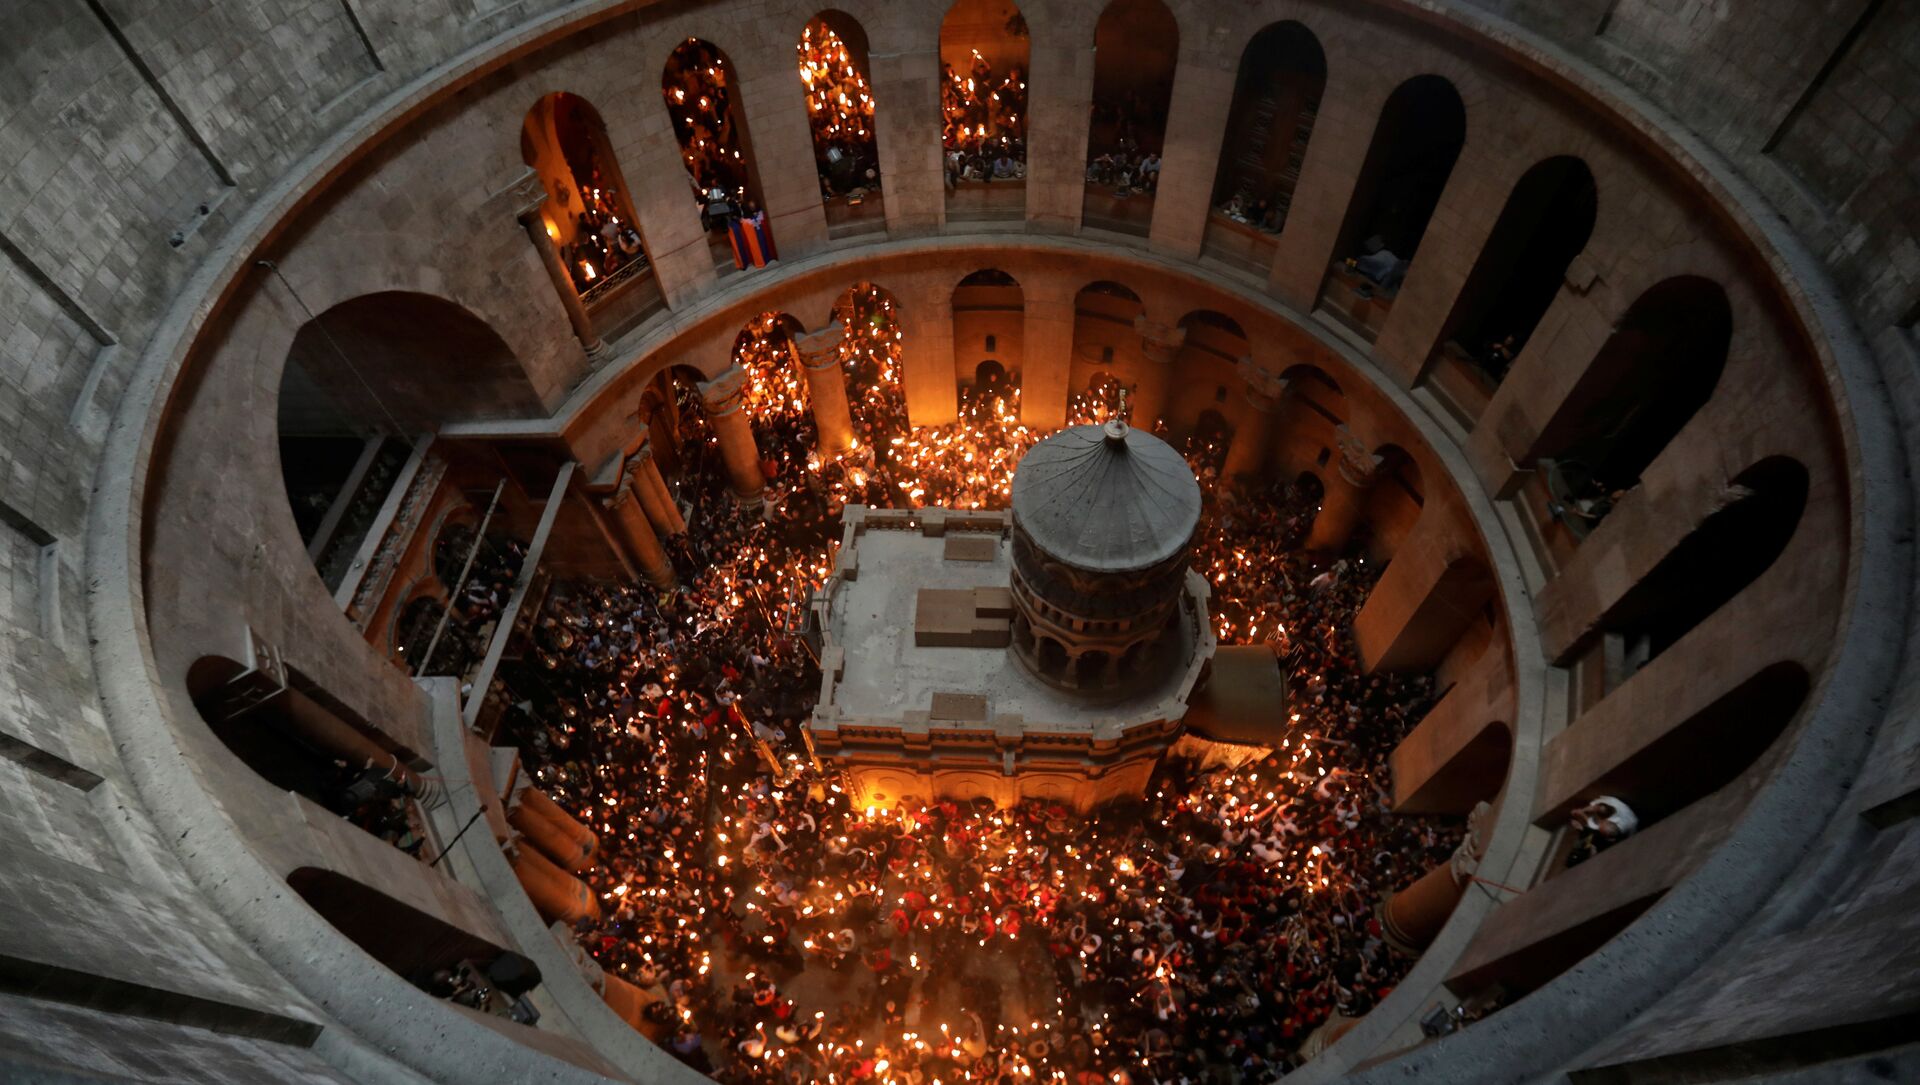 Worshippers hold candles as they take part in the Christian Orthodox Holy Fire ceremony at the Church of the Holy Sepulchre in Jerusalem's Old City - Sputnik International, 1920, 01.04.2021